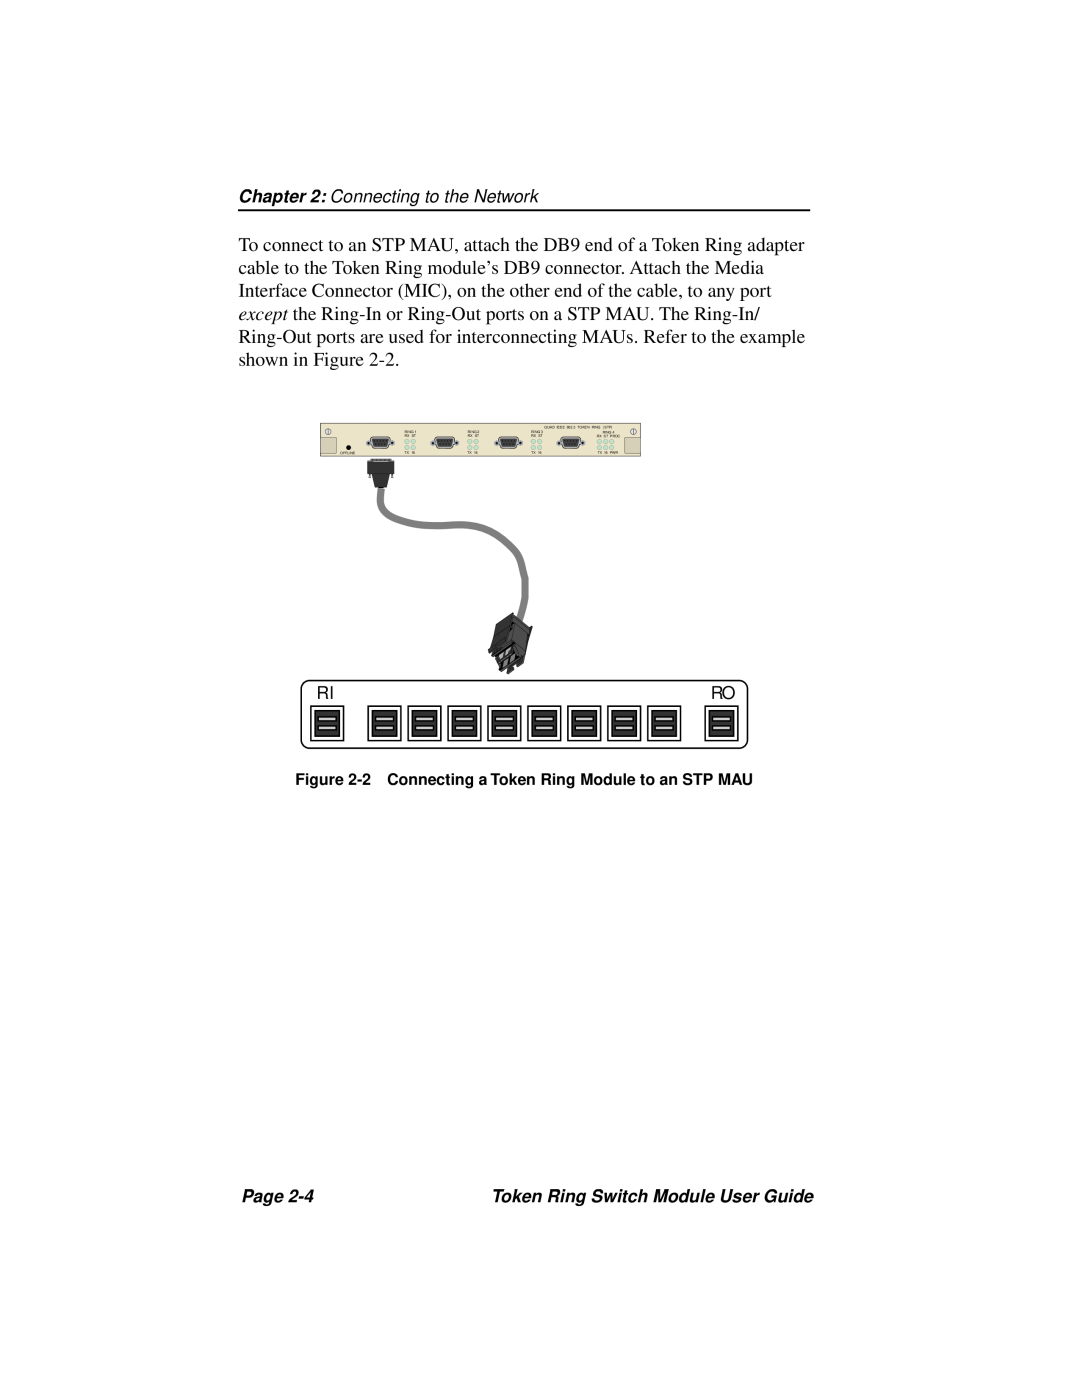 Cabletron Systems 3T02-04 manual 2 Connecting a Token Ring Module to an STP MAU 